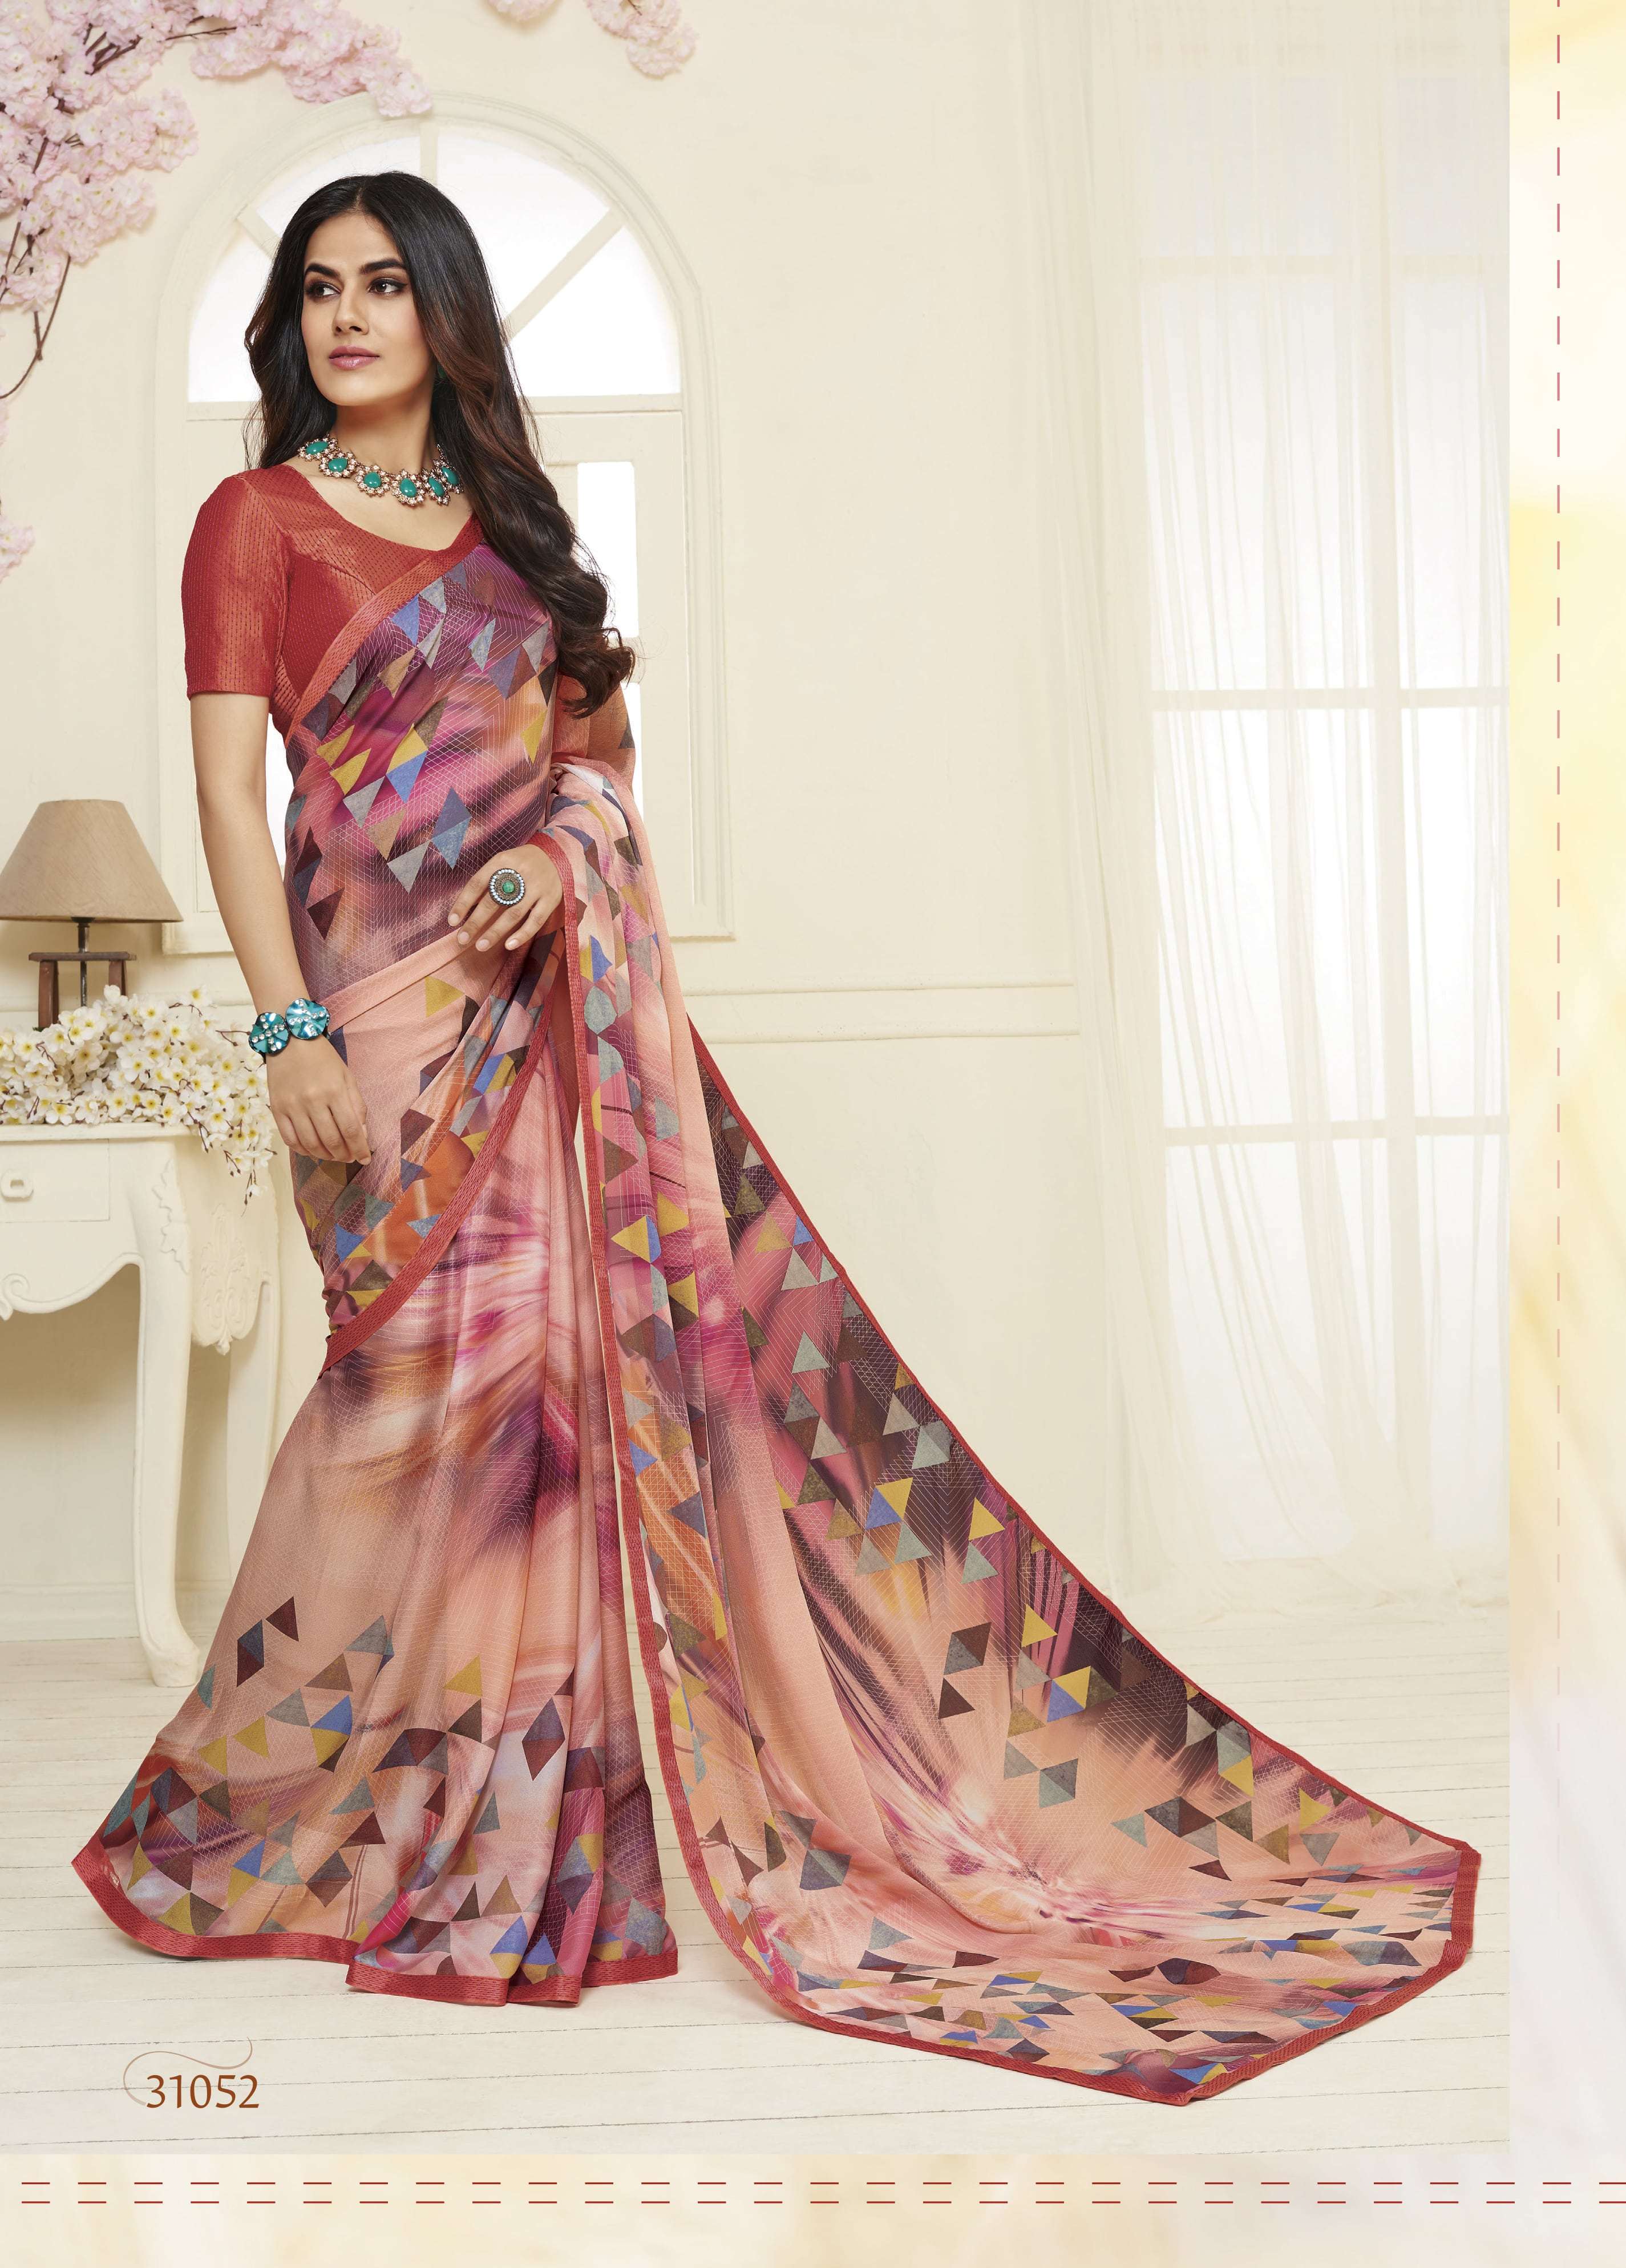 PRINTONIC VOL-3 BY SUBHASH SAREES 31051 TO 31066 SERIES INDIAN TRADITIONAL WEAR COLLECTION BEAUTIFUL STYLISH FANCY COLORFUL PARTY WEAR & OCCASIONAL WEAR GEORGETTE/SATIN GEORGETTE SAREES AT WHOLESALE PRICE